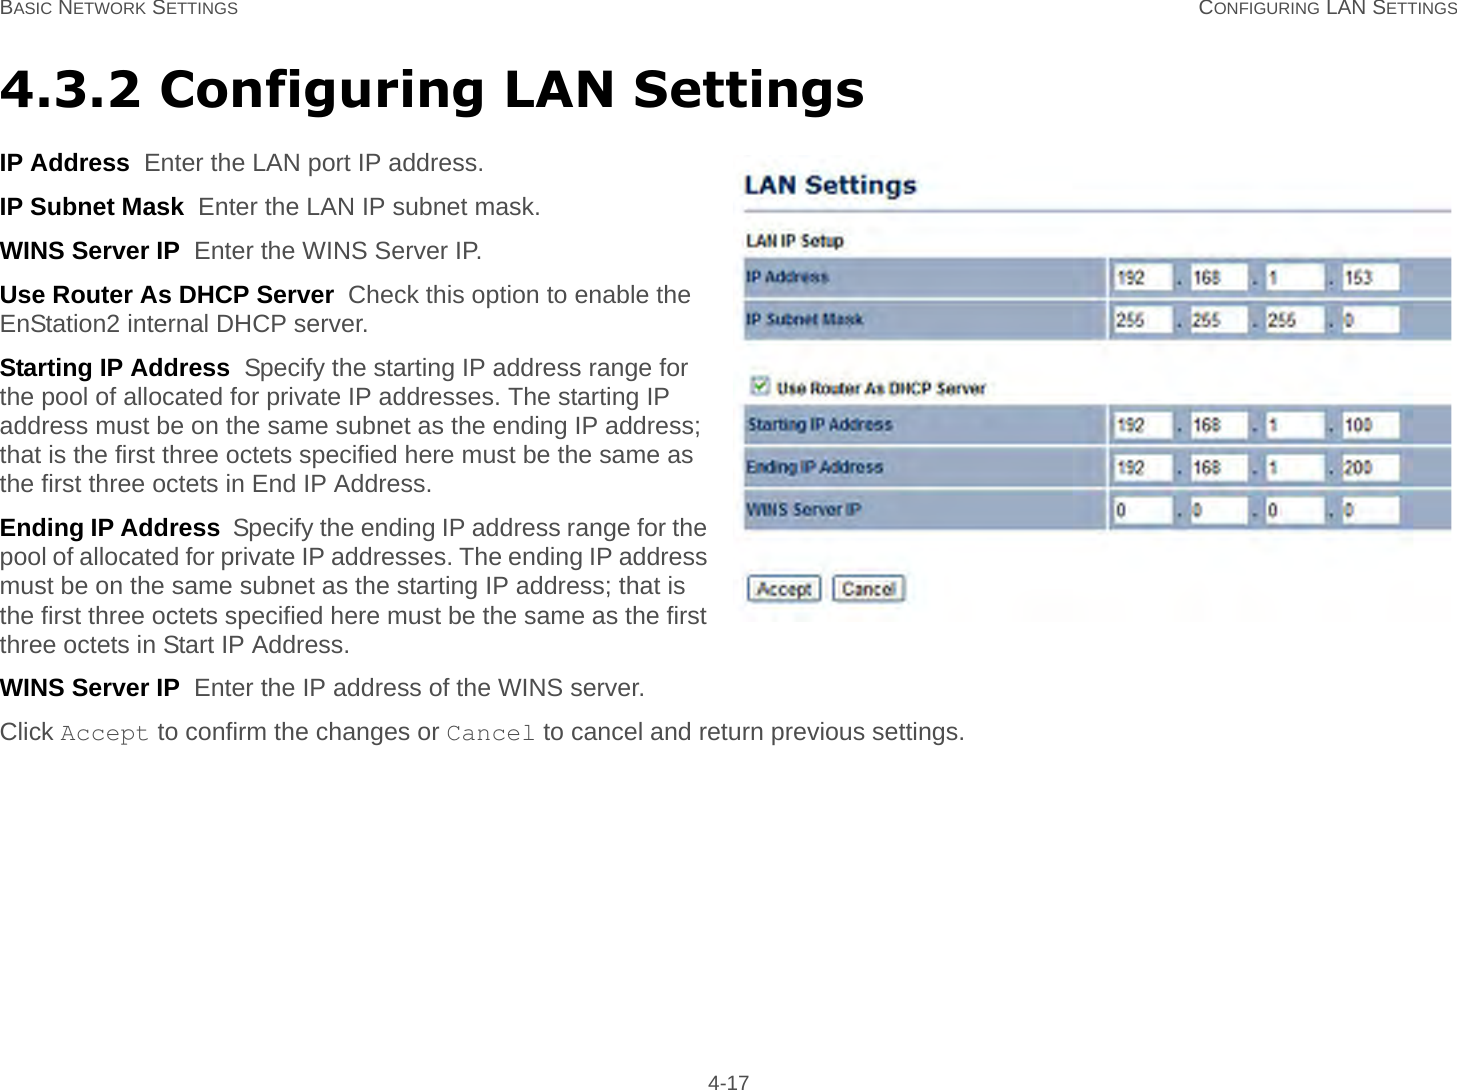 BASIC NETWORK SETTINGS CONFIGURING LAN SETTINGS 4-174.3.2 Configuring LAN SettingsIP Address  Enter the LAN port IP address.IP Subnet Mask  Enter the LAN IP subnet mask.WINS Server IP  Enter the WINS Server IP.Use Router As DHCP Server  Check this option to enable the EnStation2 internal DHCP server.Starting IP Address  Specify the starting IP address range for the pool of allocated for private IP addresses. The starting IP address must be on the same subnet as the ending IP address; that is the first three octets specified here must be the same as the first three octets in End IP Address.Ending IP Address  Specify the ending IP address range for the pool of allocated for private IP addresses. The ending IP address must be on the same subnet as the starting IP address; that is the first three octets specified here must be the same as the first three octets in Start IP Address.WINS Server IP  Enter the IP address of the WINS server.Click Accept to confirm the changes or Cancel to cancel and return previous settings.